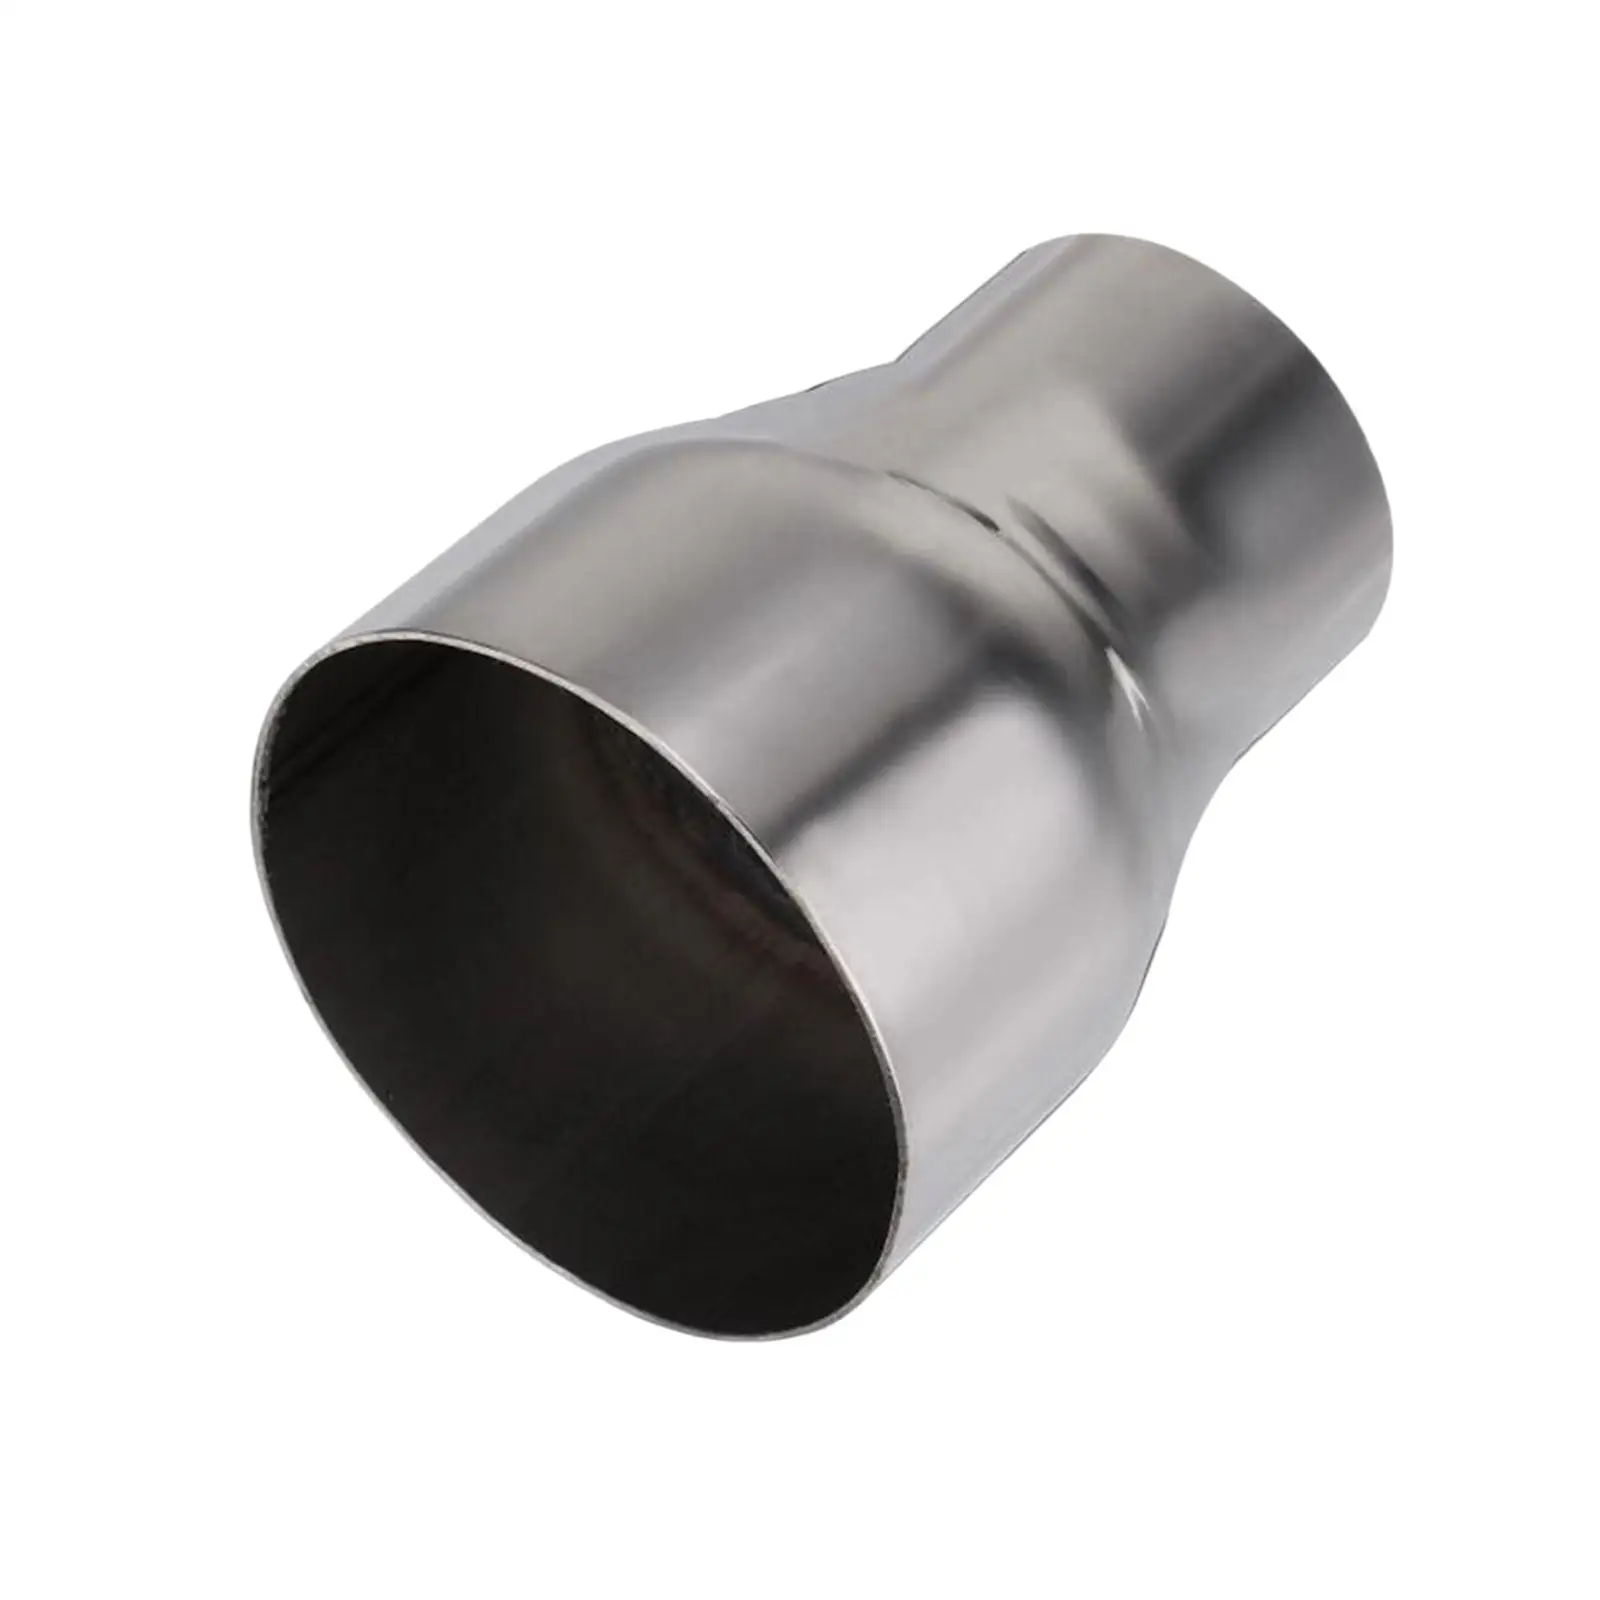 Professional Tailpipe Adapter High Performance Replaces Automotive Assembly